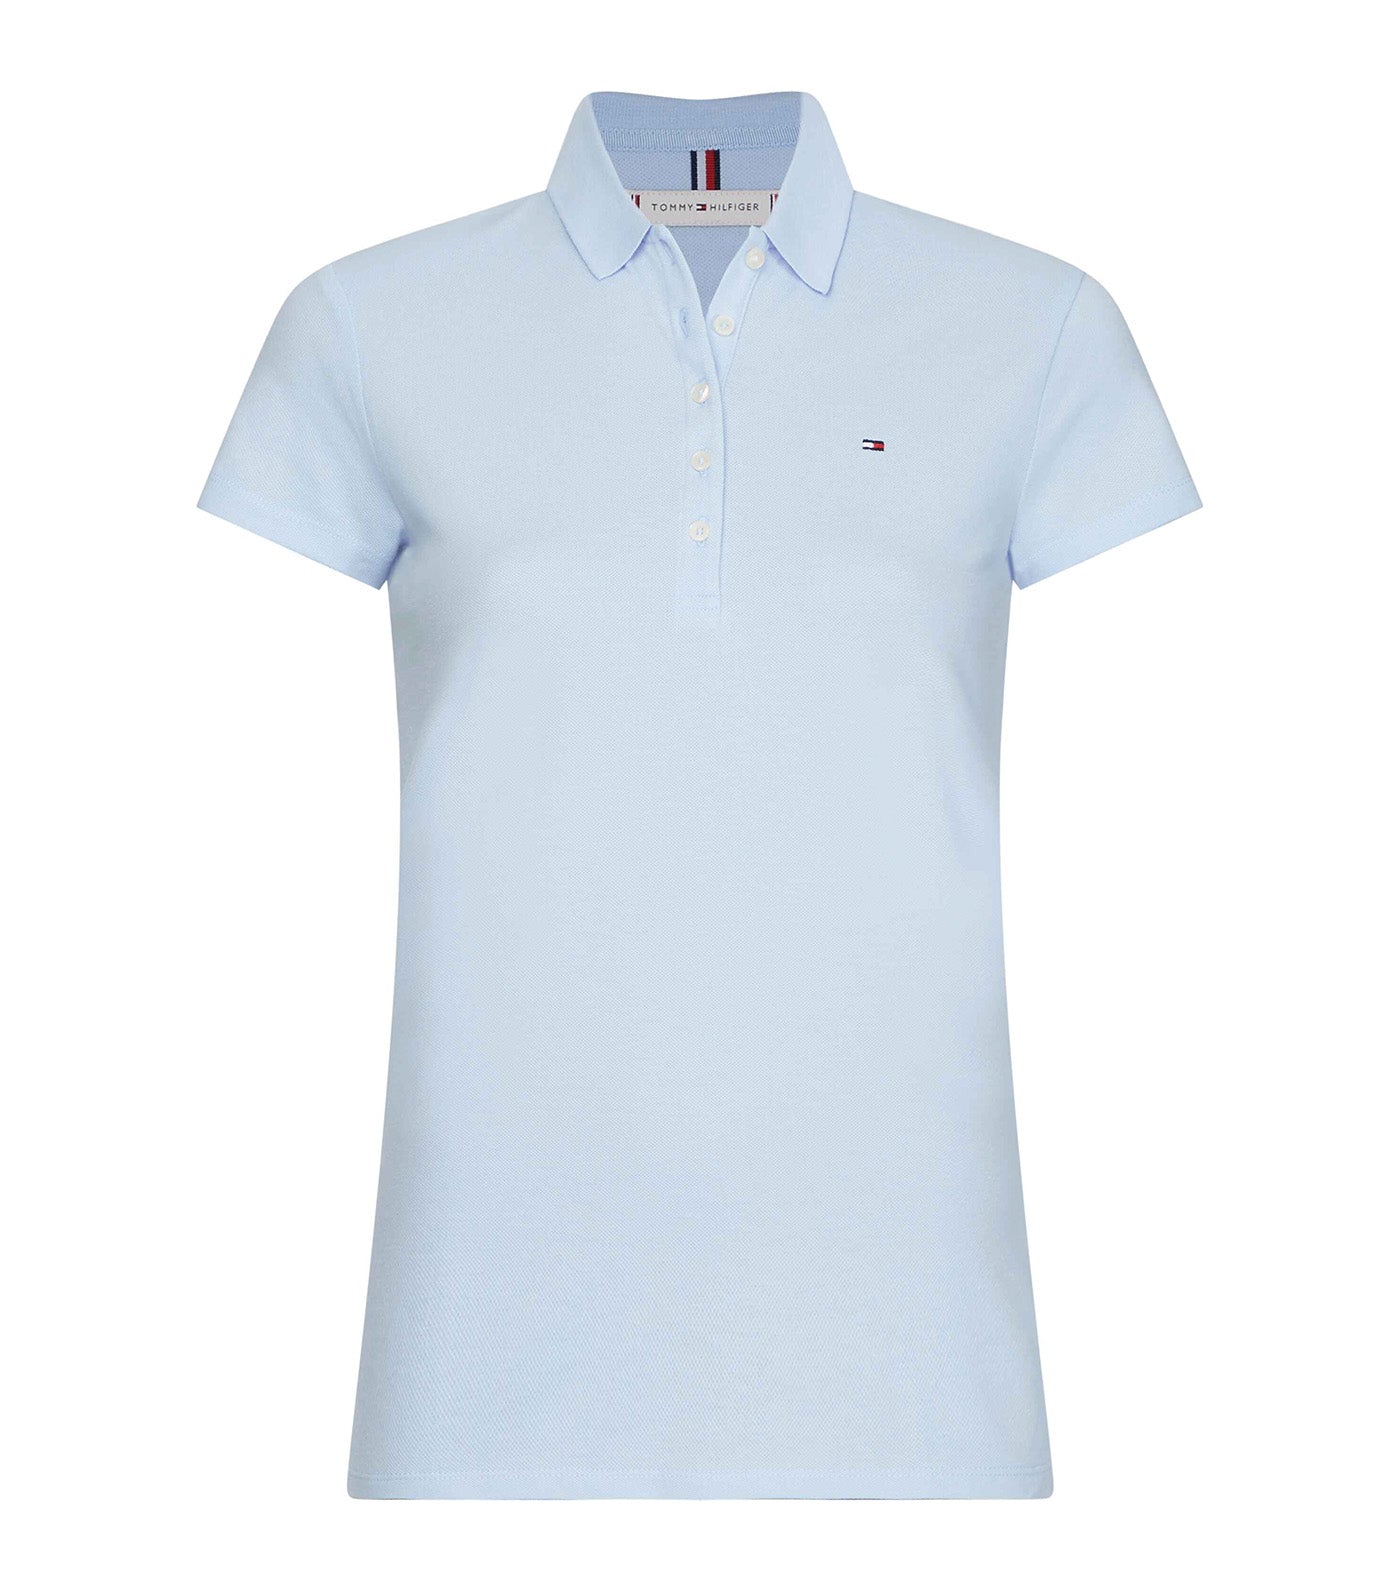 Tommy Hilfiger Polo - Flag - Breezy Blue » Cheap Shipping